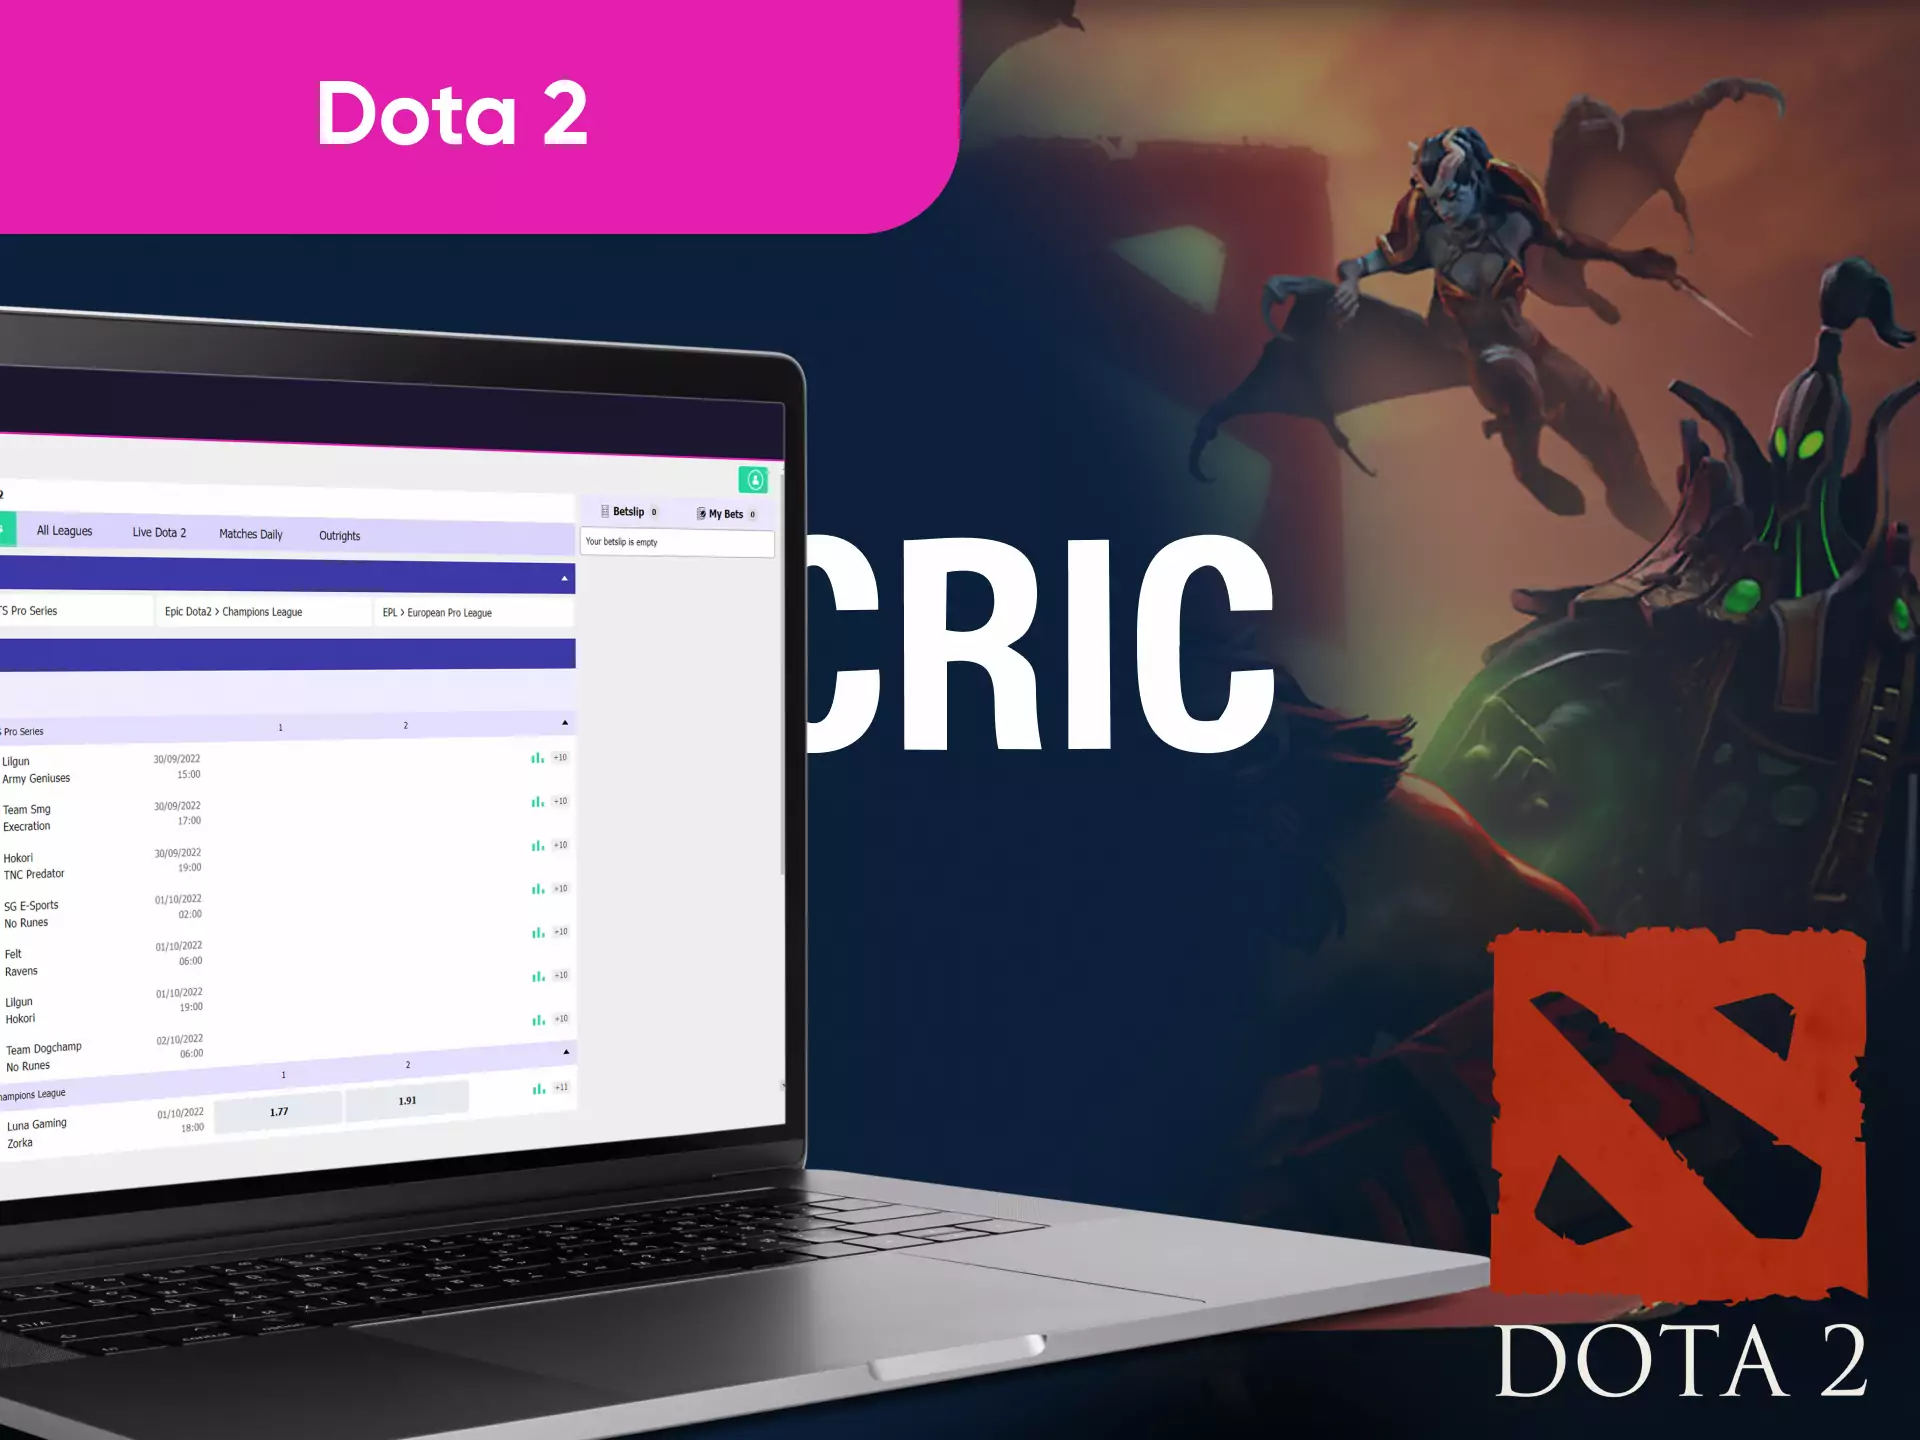 In the Becric sportsbook, you can place bets on Dota 2 events.